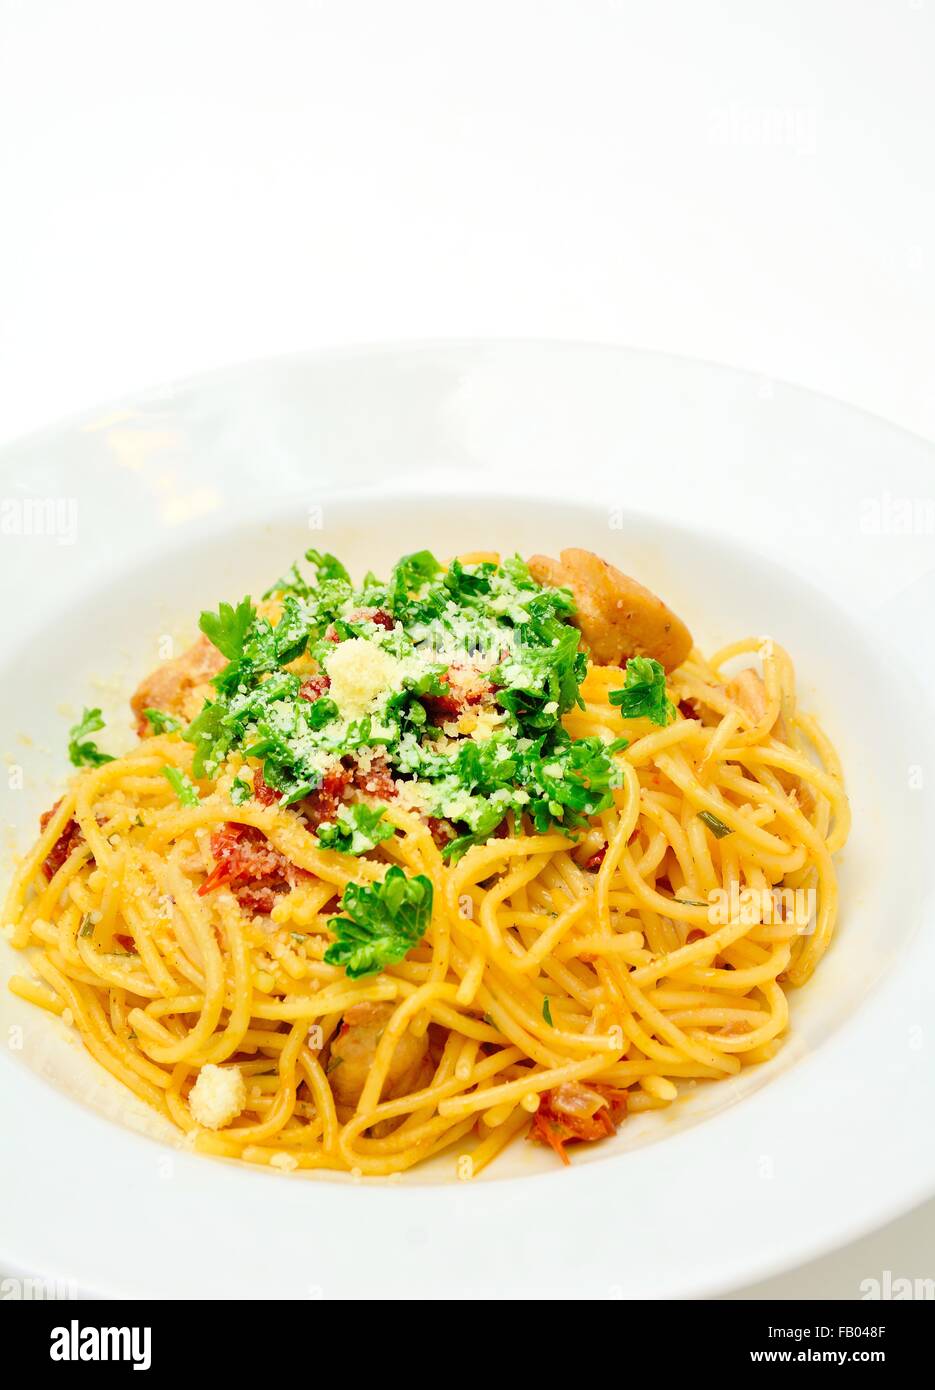 Spaghetti with sun-dried tomatoes, chicken meat, parmesan and sprinkled with parsley. Stock Photo